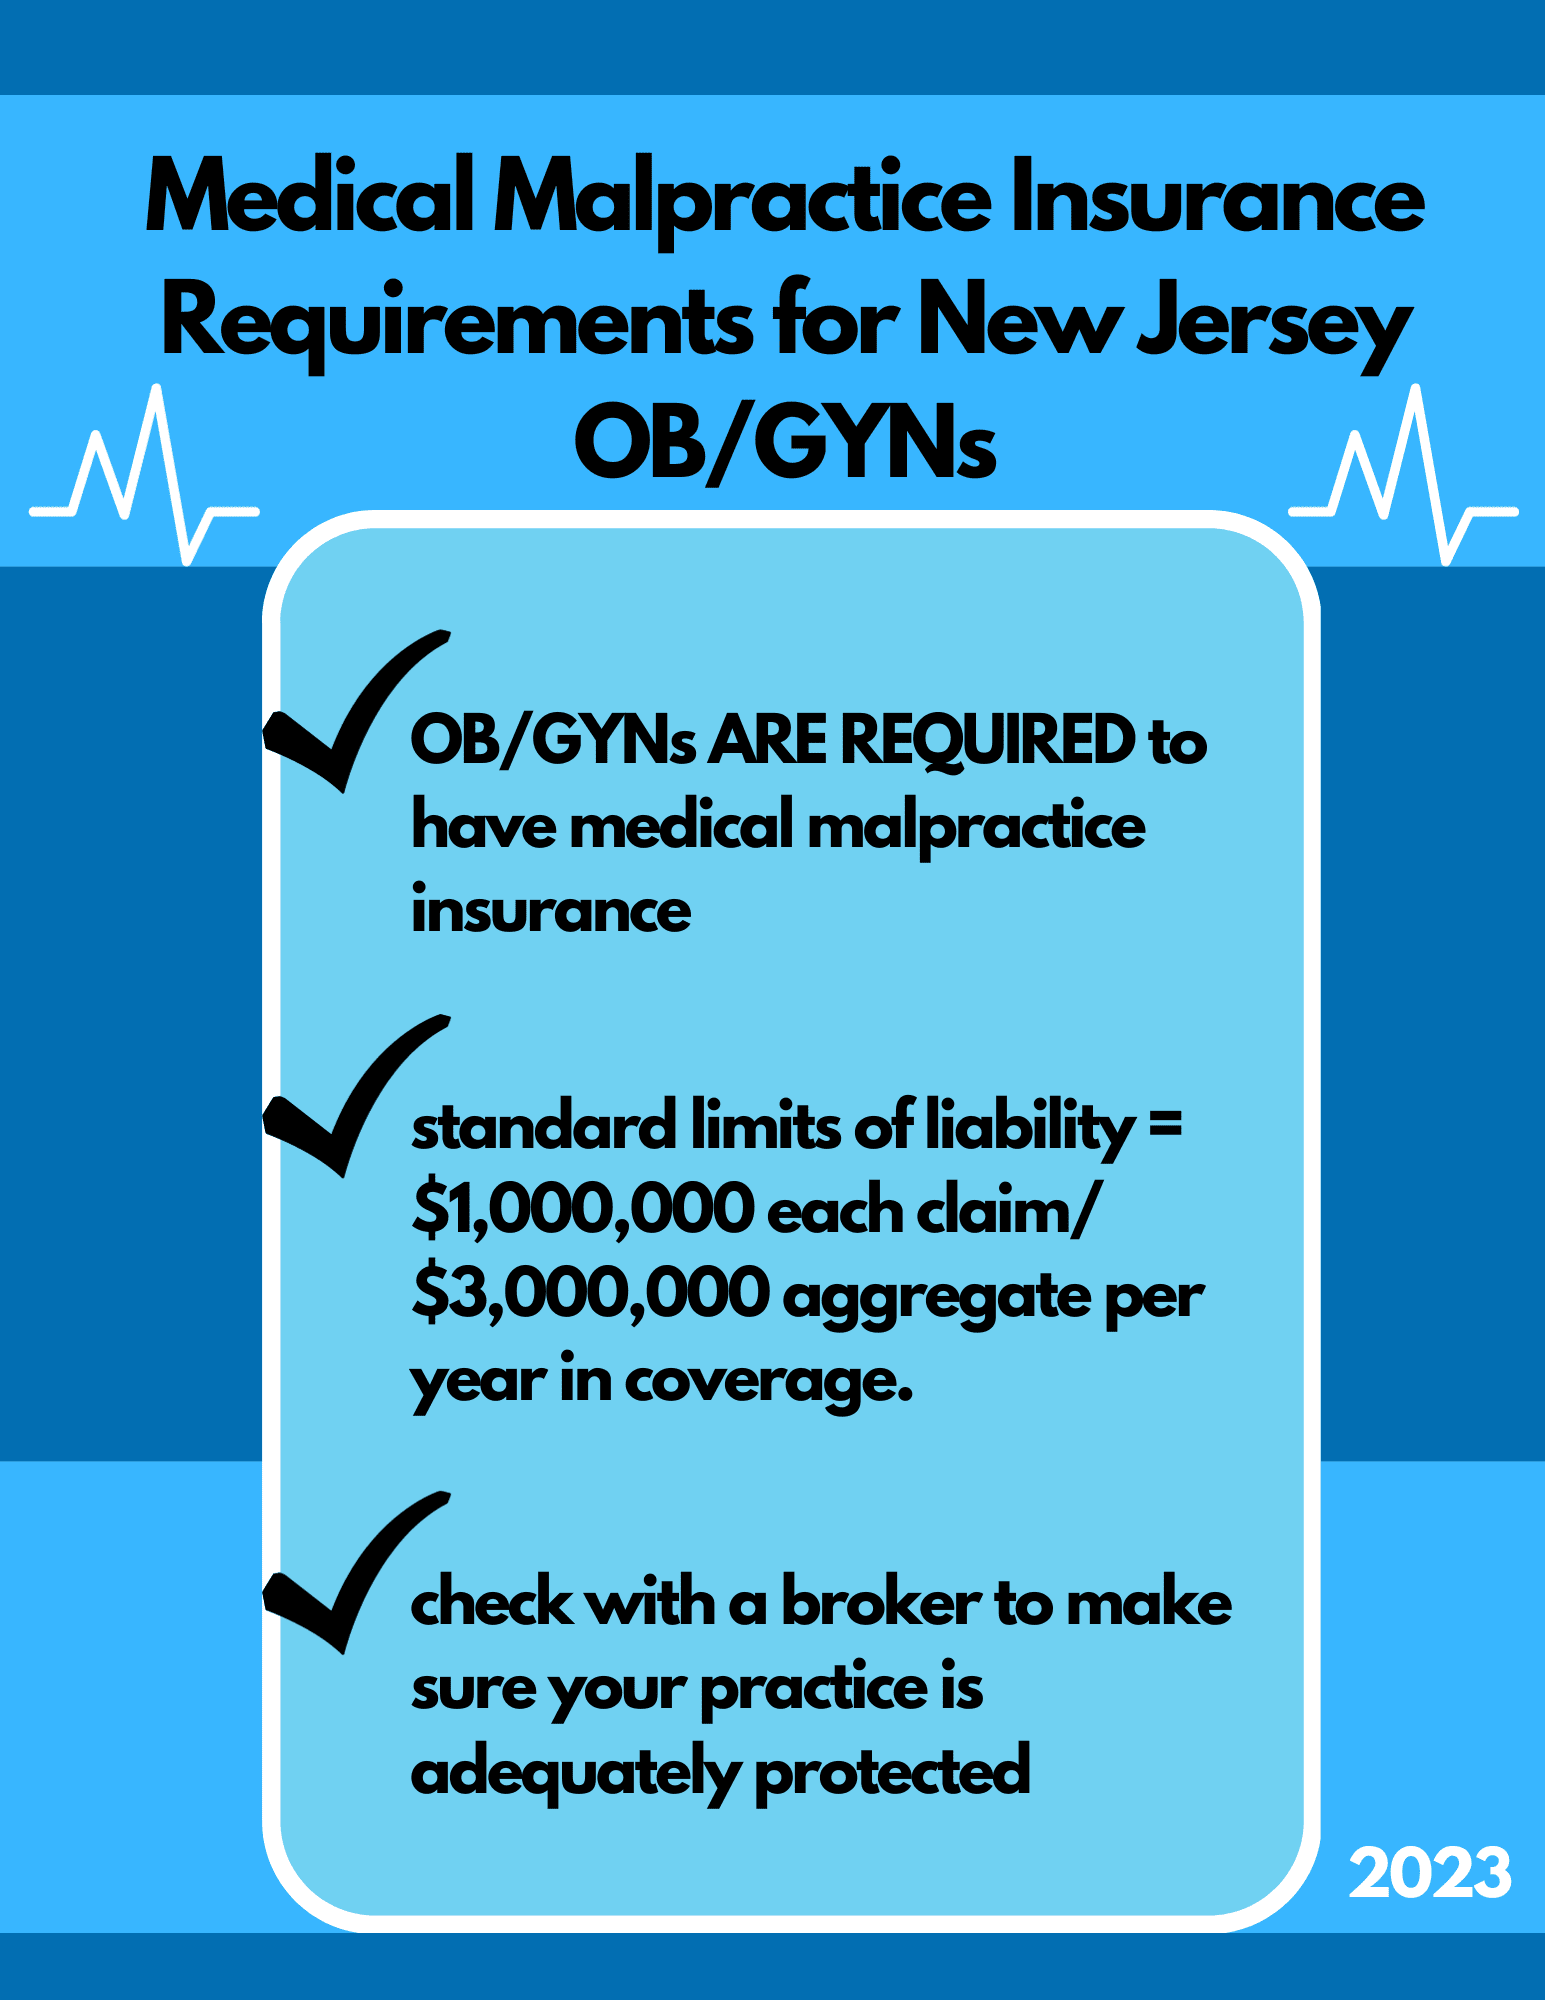 Medical Malpractice Insurance Requirements for New Jersey OB/GYNs